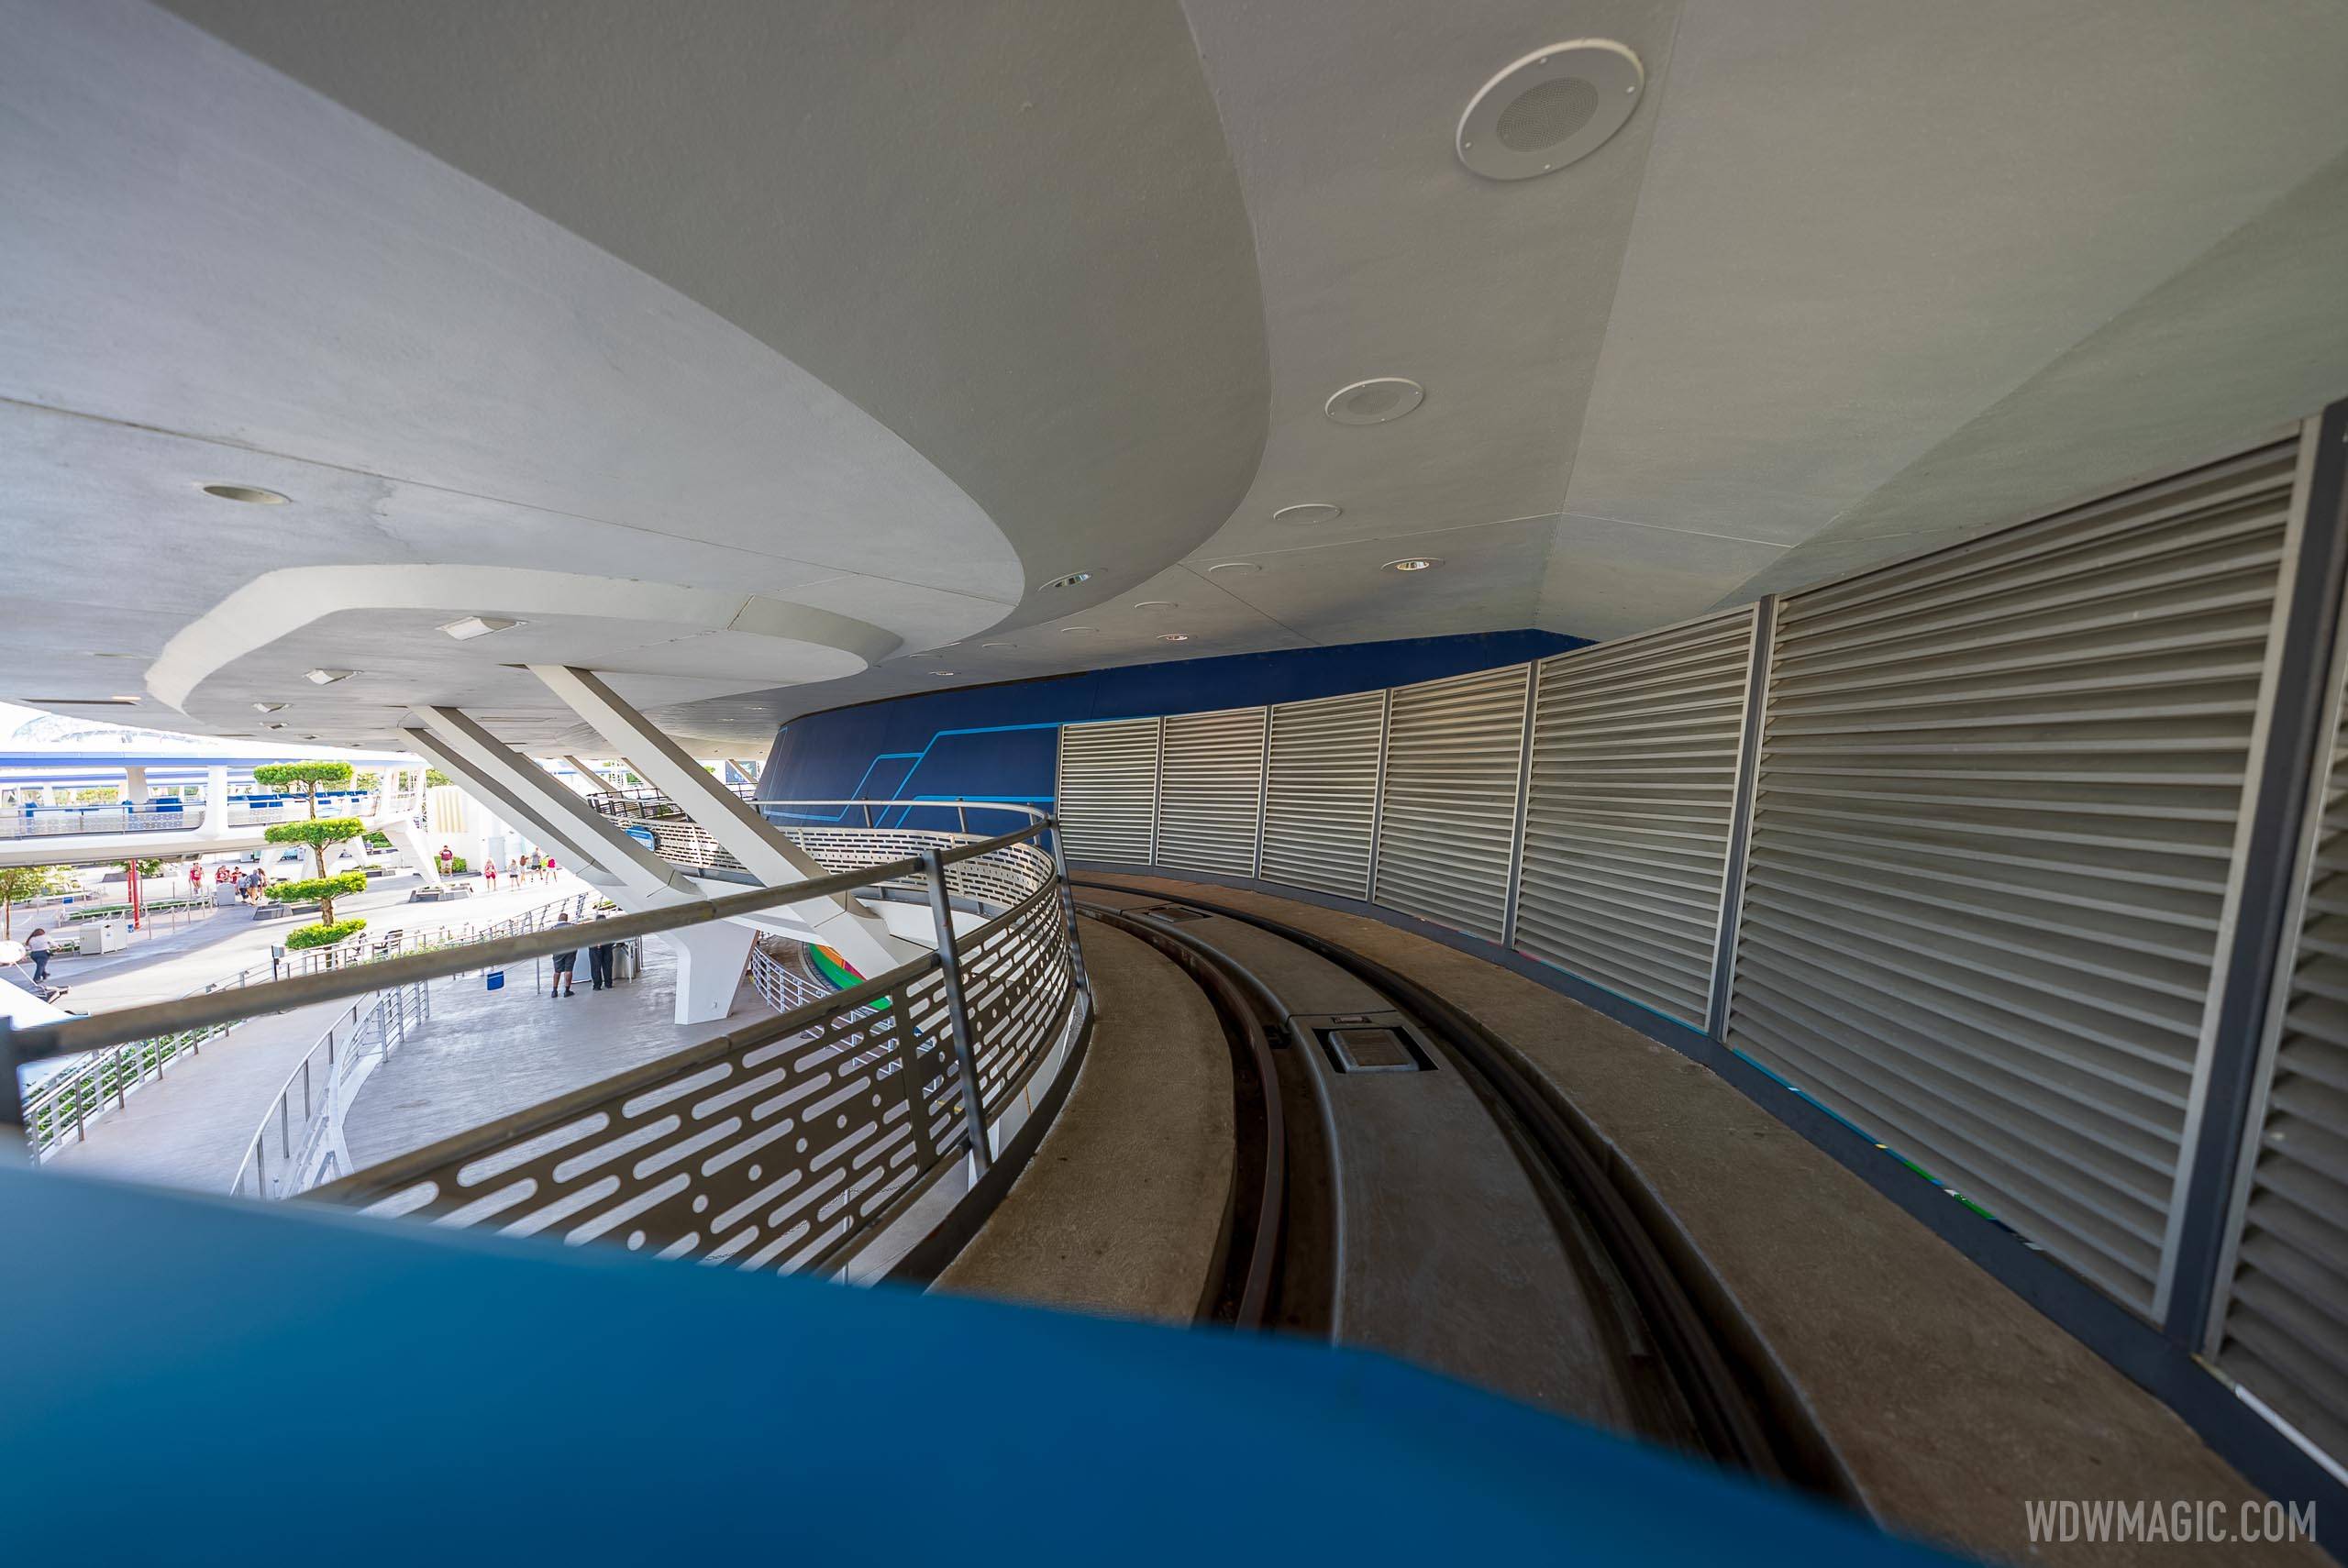 Tomorrowland Transit Authority renamed to the 'Tomorrowland Transit Authority PeopleMover'